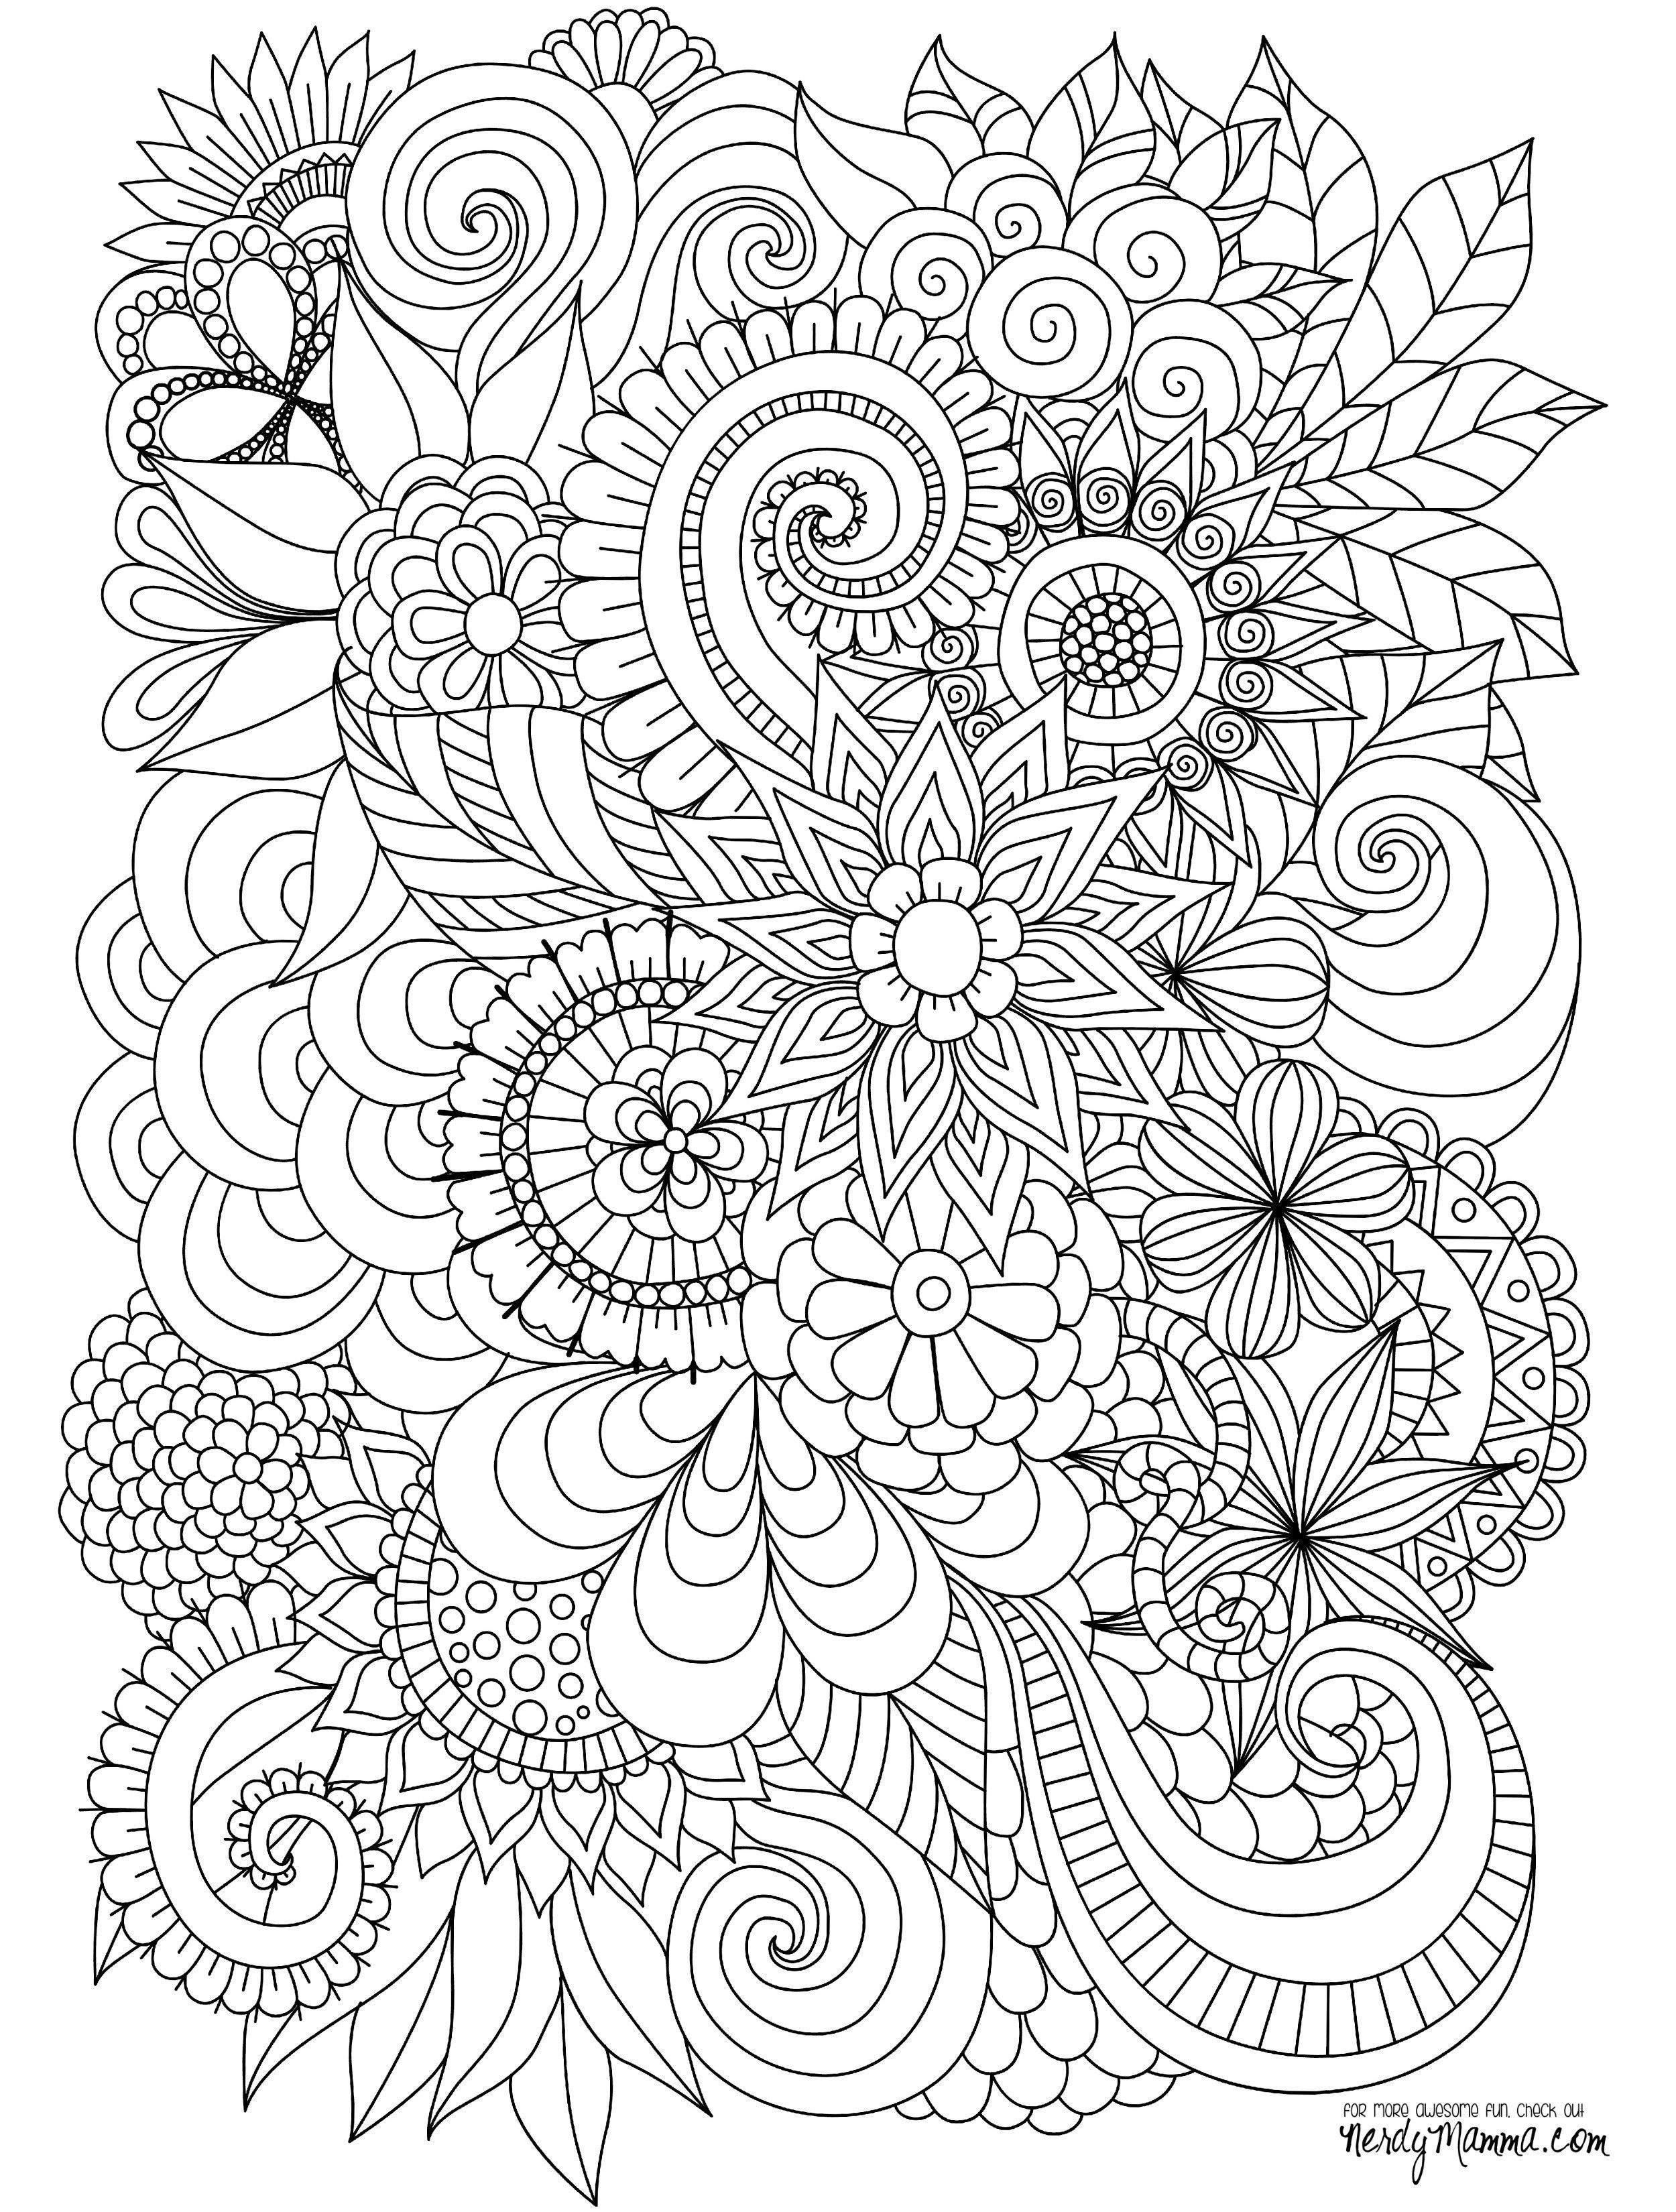 Mandala Coloring Pages For Adults Luxury Mandala Coloring Sheets Pdf Jvzooreview